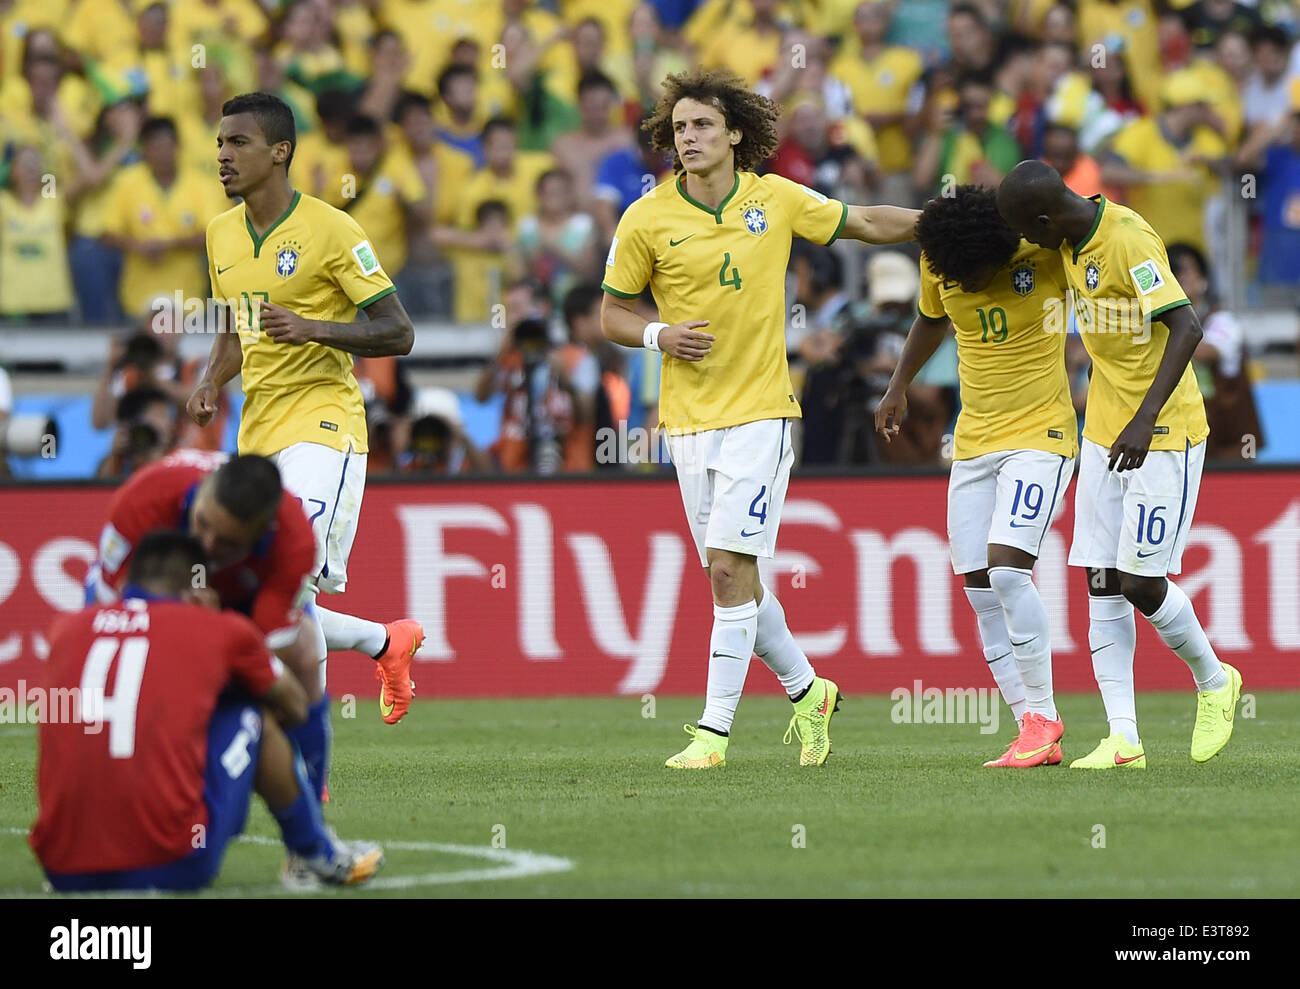 Belo Horizonte, Brazil. 28th June, 2014. Brazil's Ramires (1st R) and David Luiz (3rd R) comfort Willian (2nd R) who missed a penalty goal in the penalty shoot-out during a Round of 16 match between Brazil and Chile of 2014 FIFA World Cup at the Estadio Mineirao Stadium in Belo Horizonte, Brazil, on June 28, 2014. Brazil won 4-3 (3-2 in penalties) over Chile and qualified for Quarter-finals on Saturday. Credit:  Qi Heng/Xinhua/Alamy Live News Stock Photo